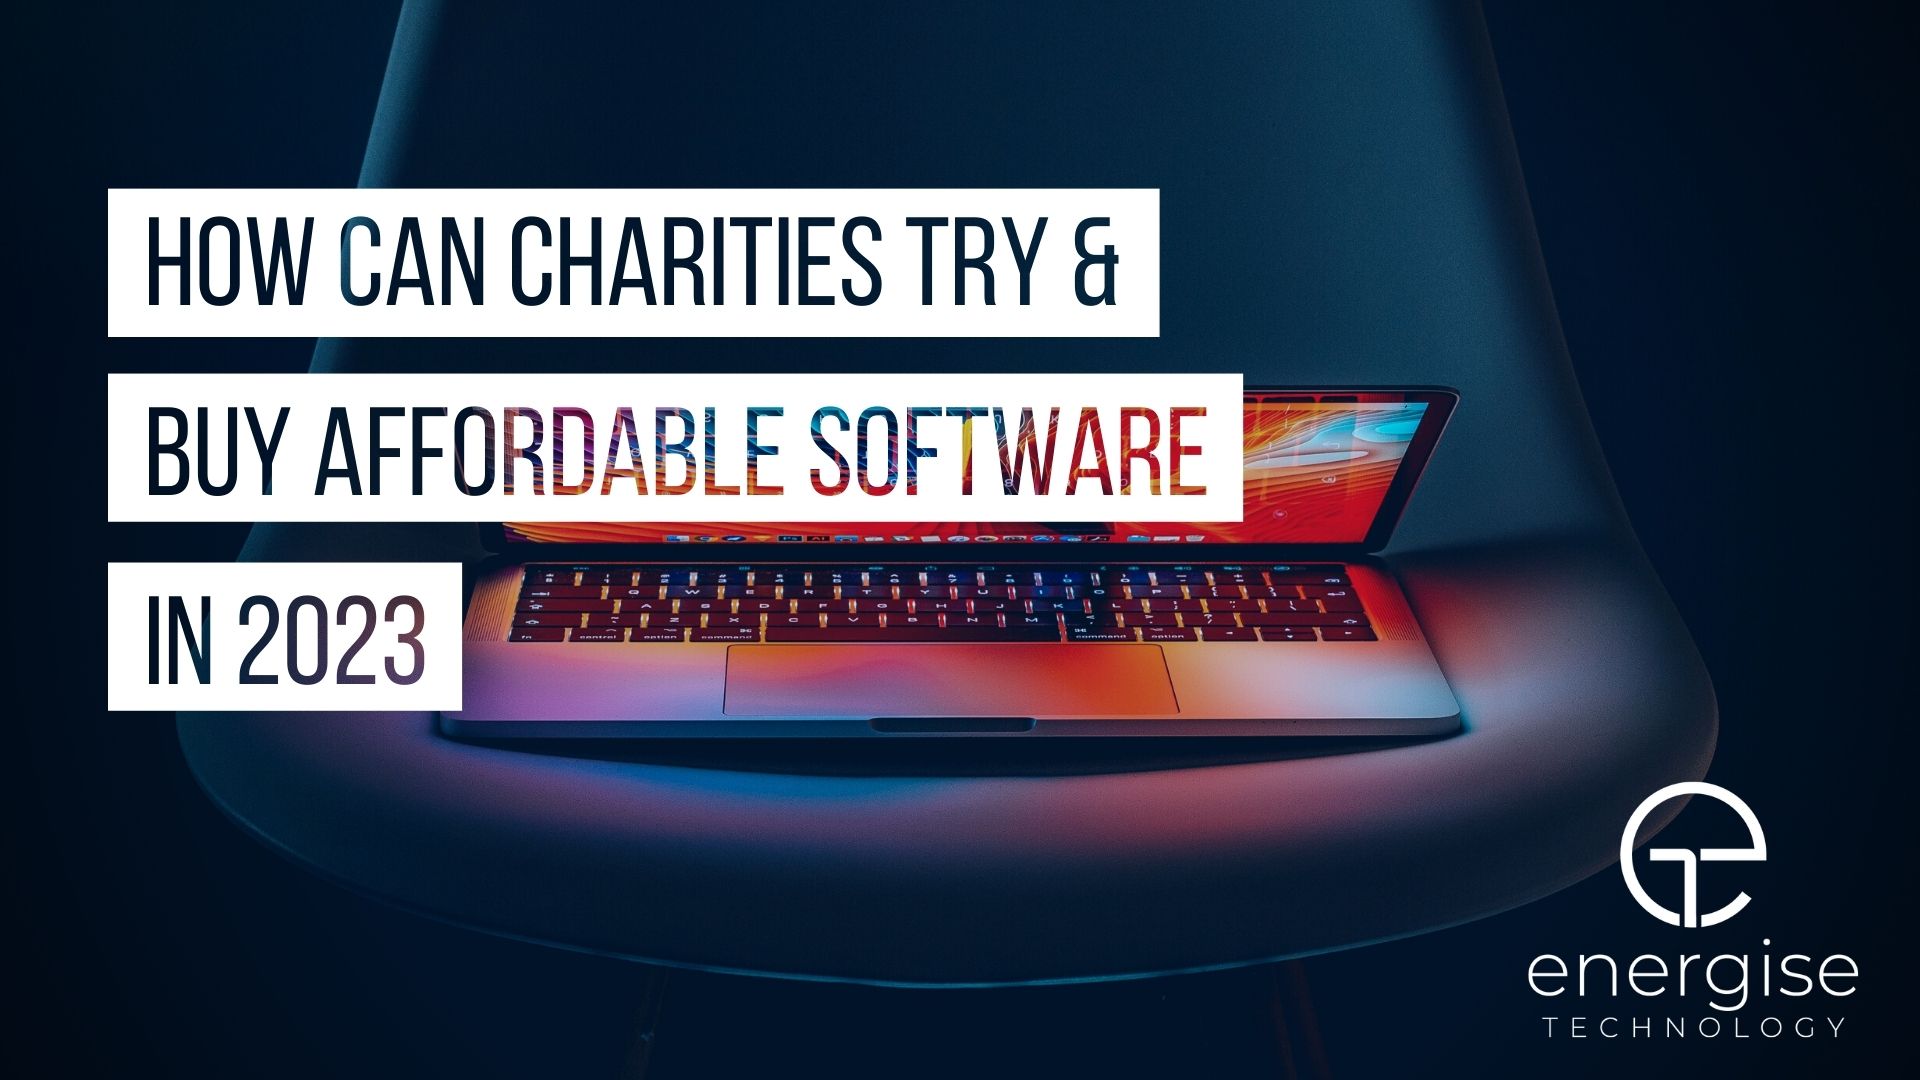 Cost of Living: How can charities try & buy affordable tech products in 2023?